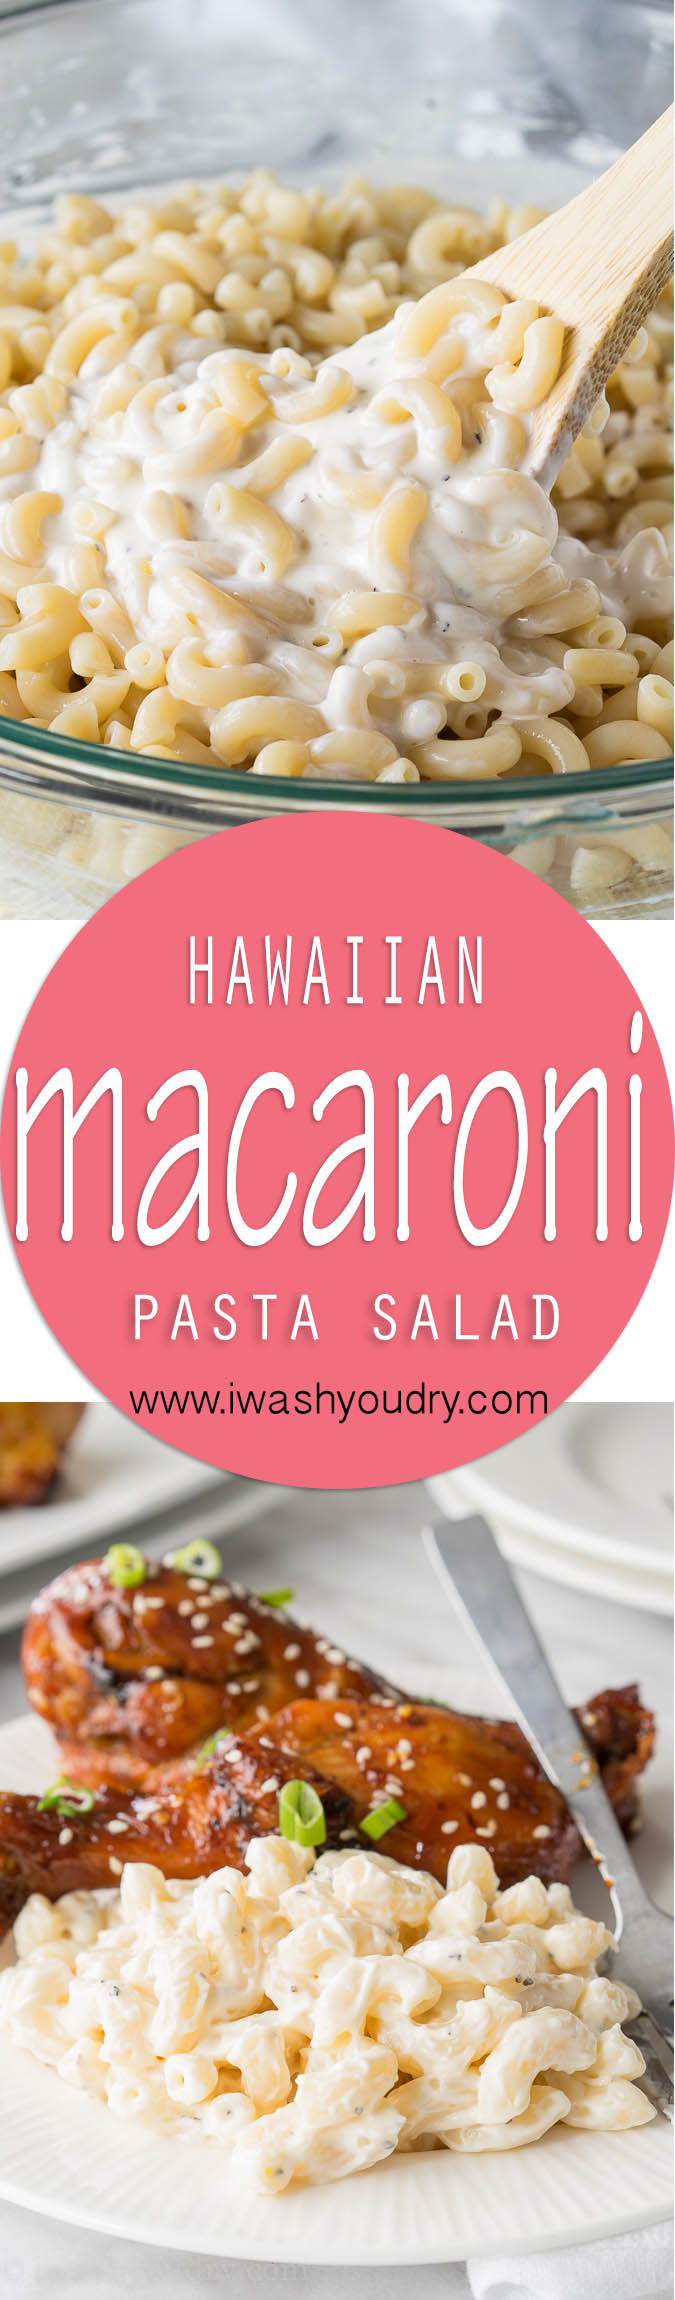 This Hawaiian Macaroni Salad recipe is the base of a great side dish! Add in extra toppings like peas, carrots, or cubed ham for the ultimate pasta salad! 